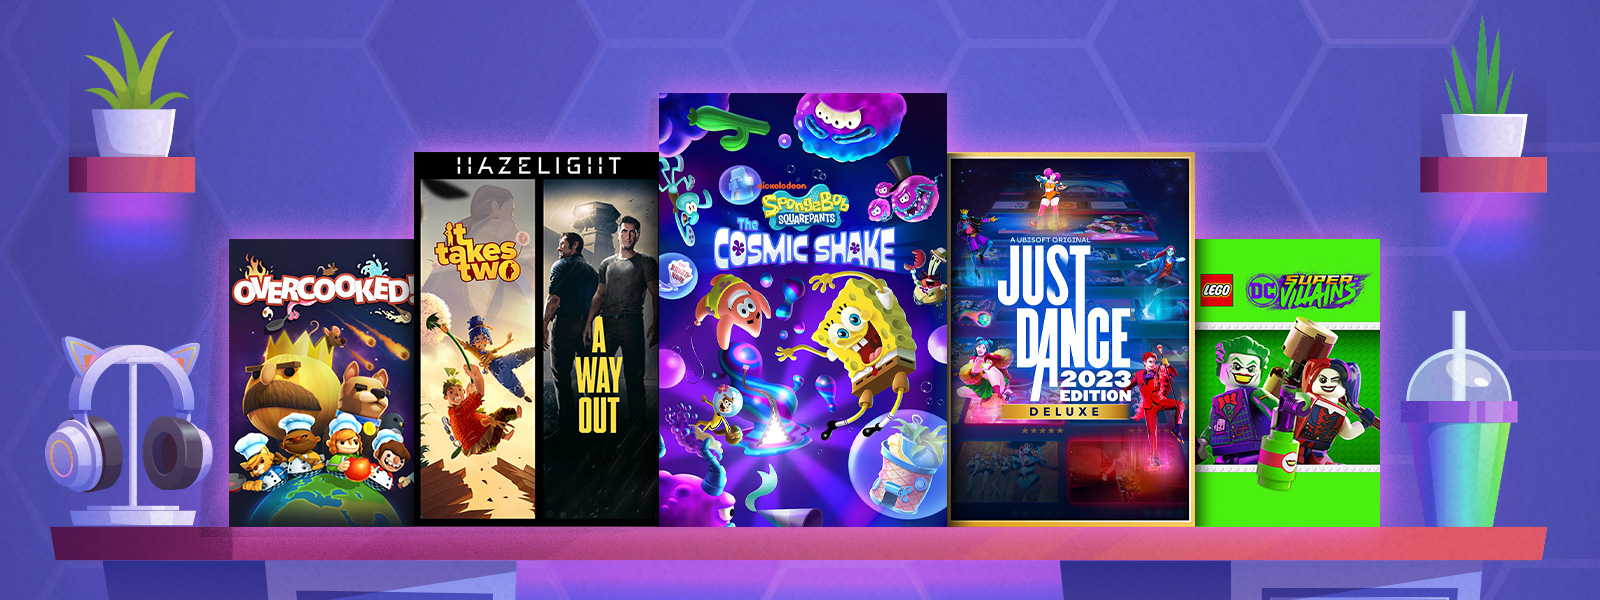 Box art from games that are part of the Family Time Sale, including SpongeBob SquarePants: The Cosmic Shake, Hazelight Bundle, and Just Dance® 2023 Deluxe Edition.